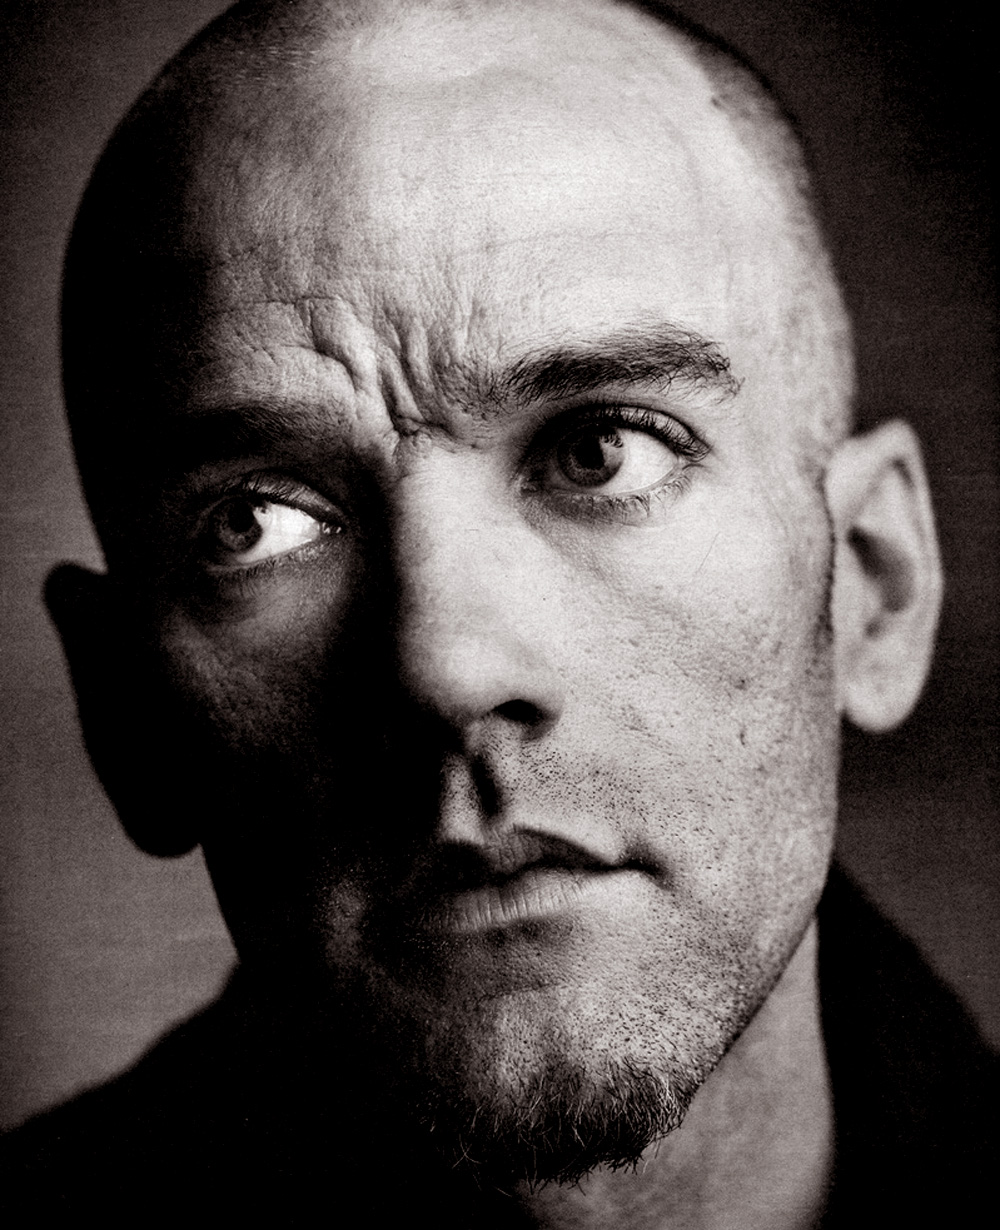 Michael Stipe photo gallery - high quality pics of Michael Stipe | ThePlace